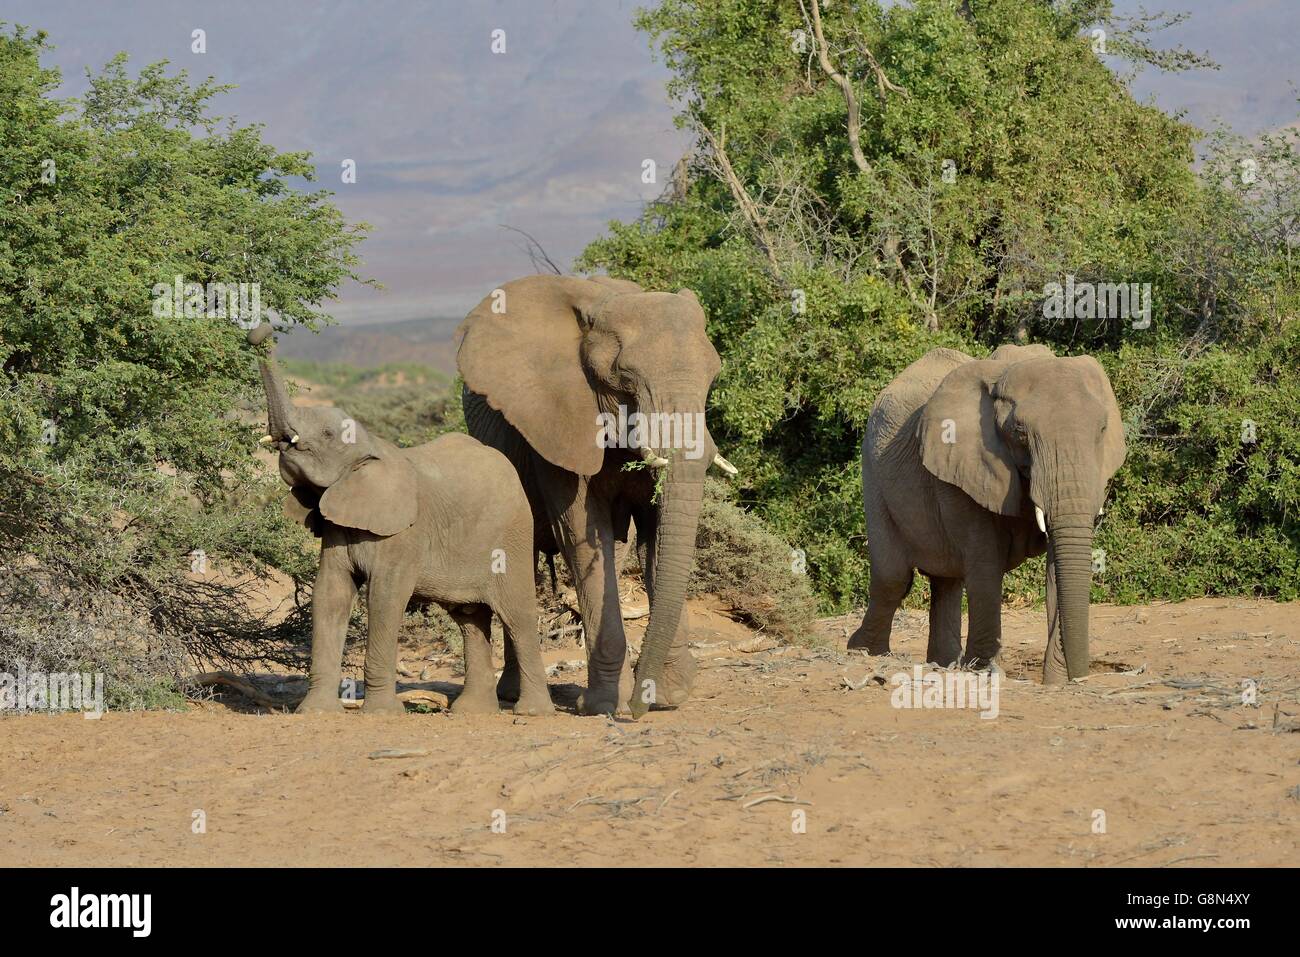 Desert elephants or African elephants (Loxodonta africana), in the dry riverbed of the Huab, Damaraland, Namibia Stock Photo